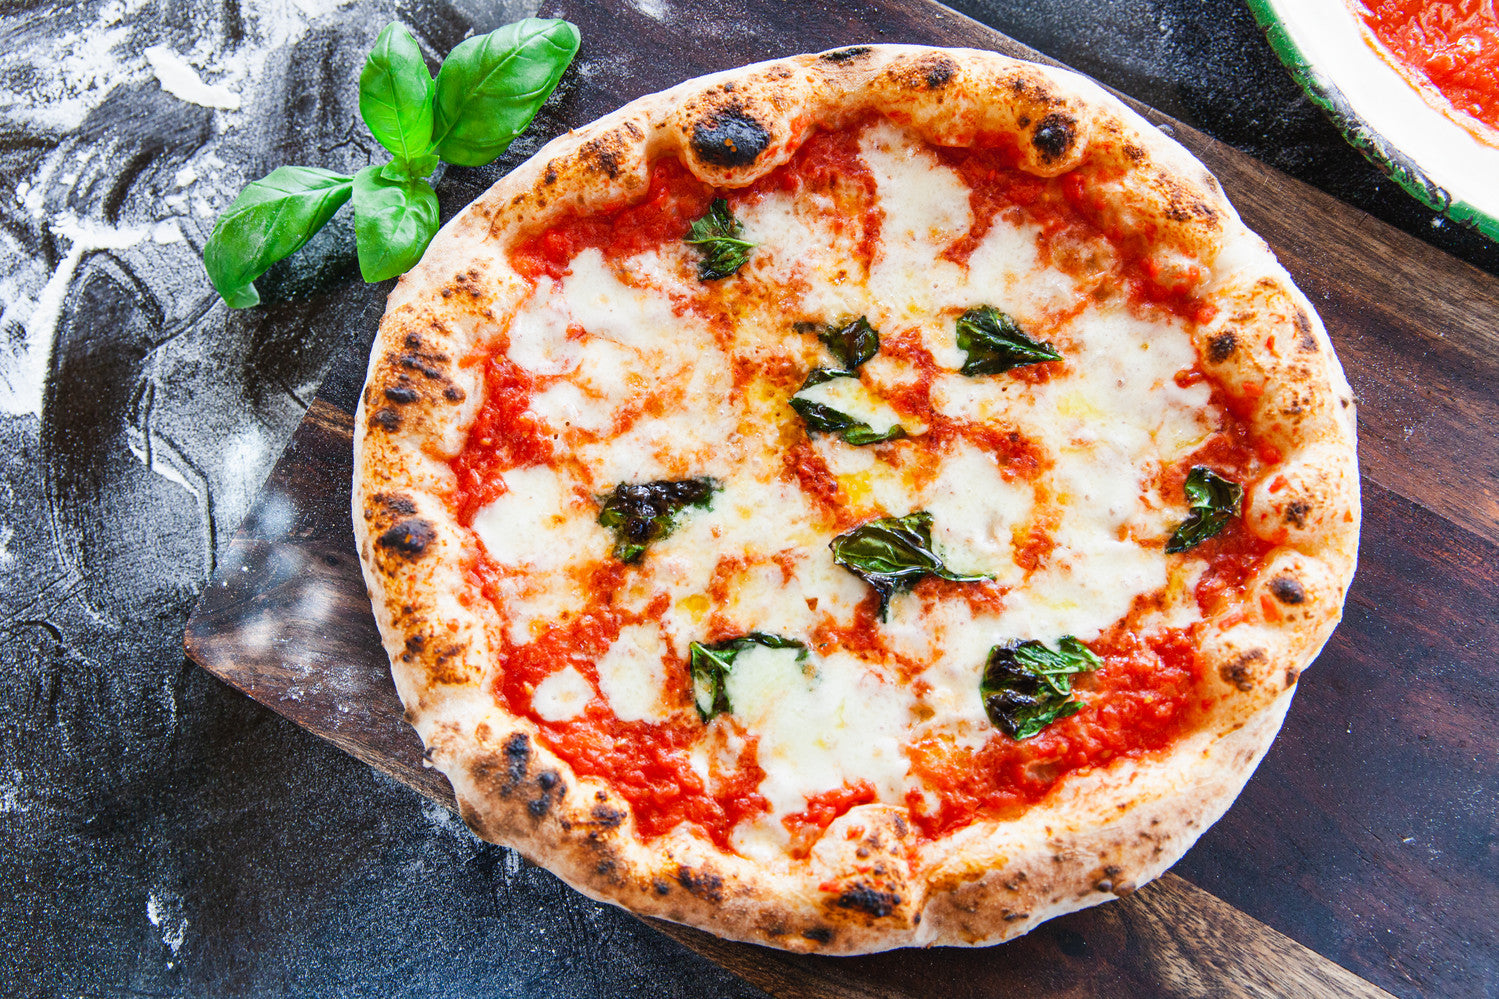 America’s most popular pizza styles